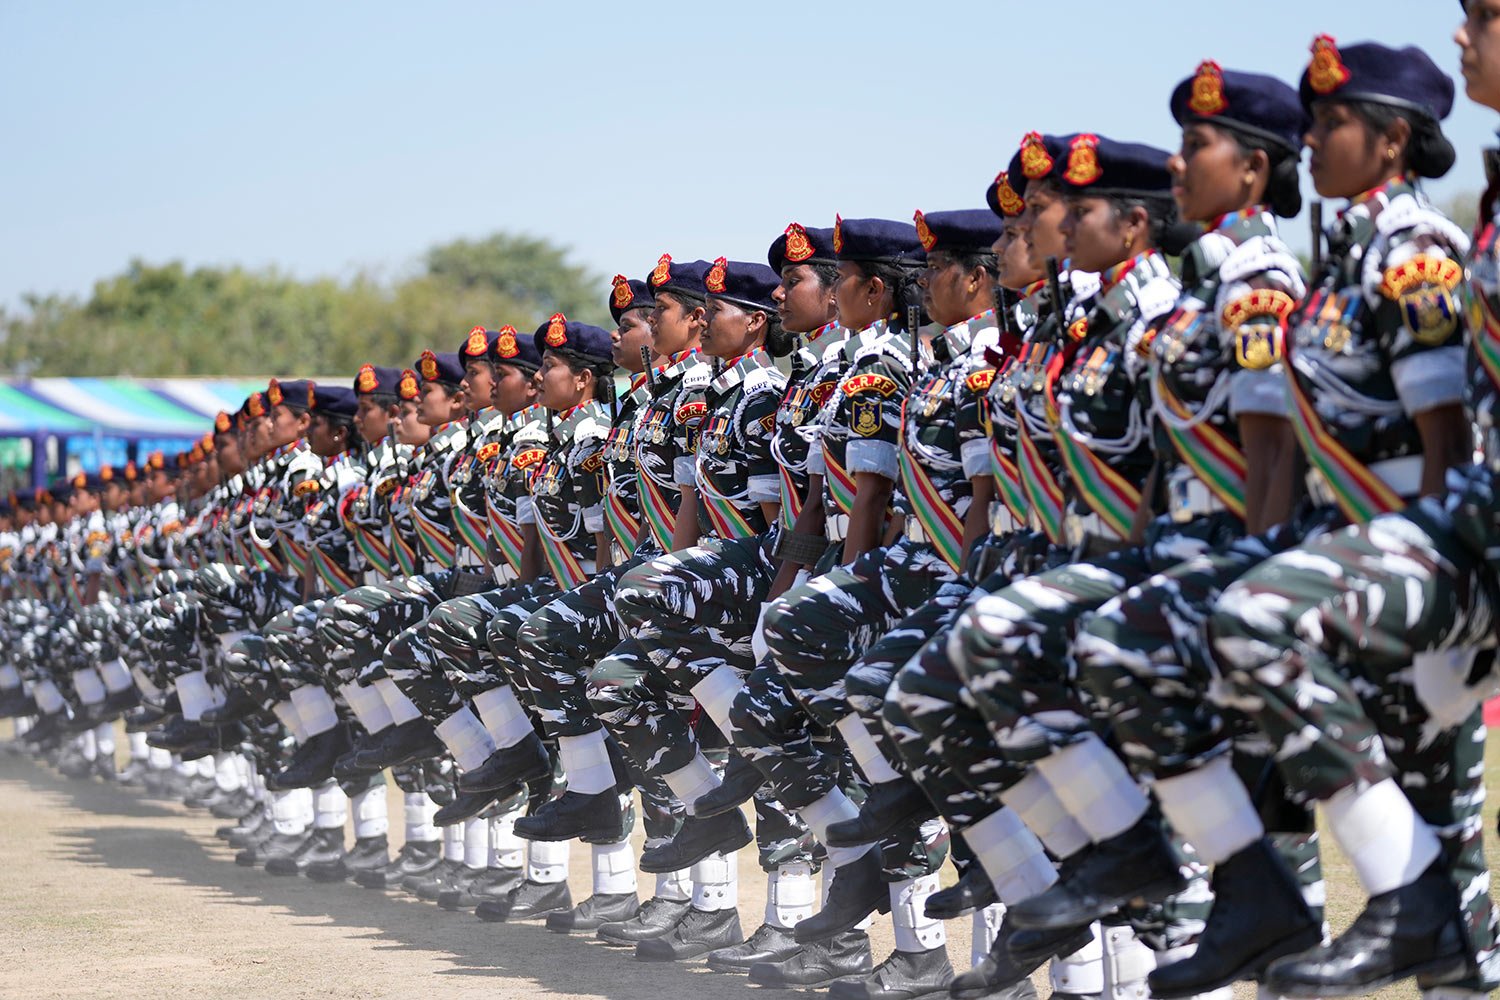  Central Reserve Police Force (CRPF) commandos march during the 83rd raising day ceremony of the CRPF at Maulana Azad Stadium in Jammu, India, Wednesday, March 16, 2022. (AP Photo/Channi Anand) 